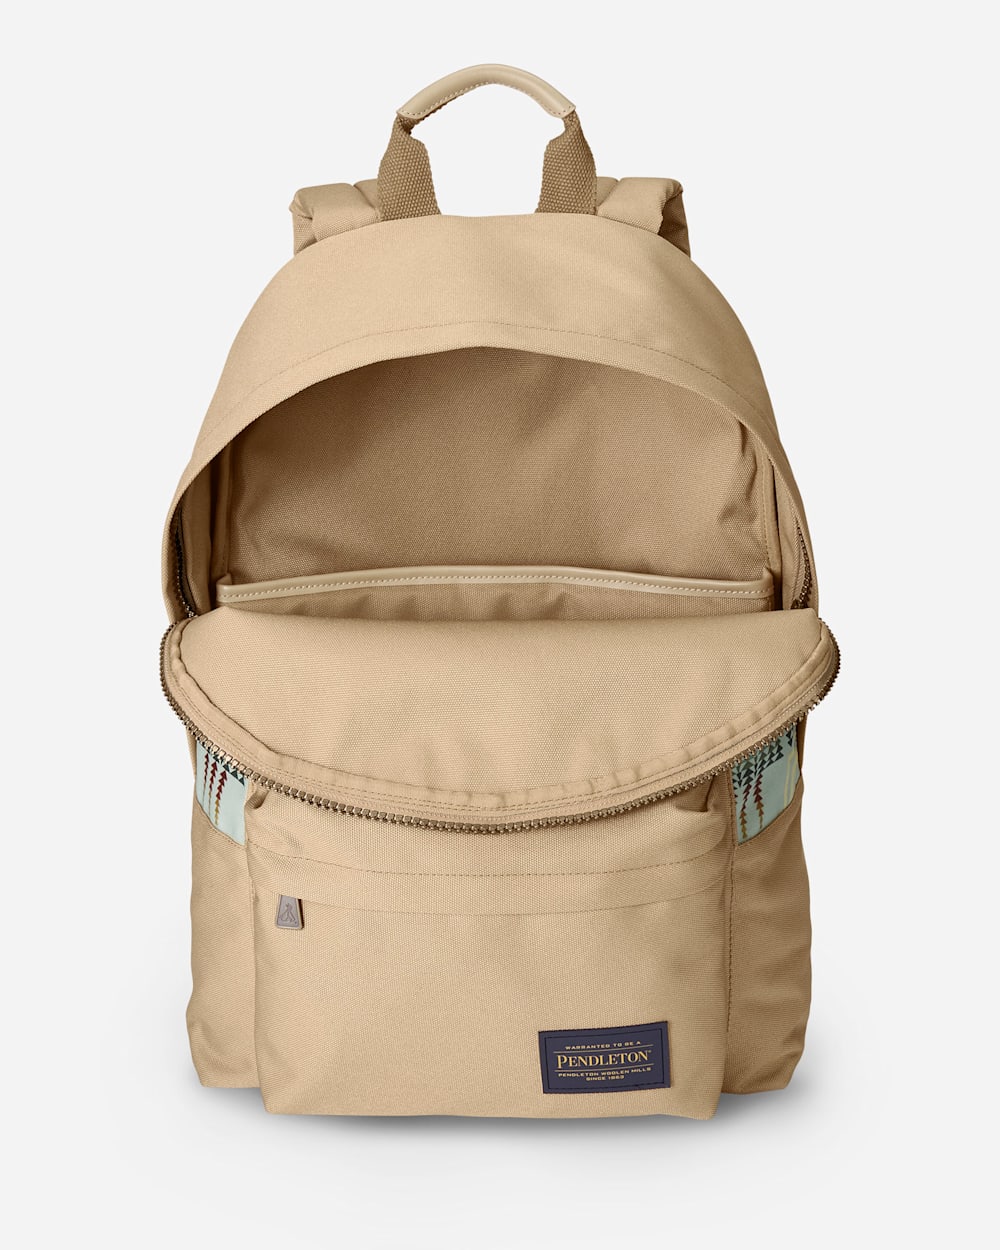 ALTERNATE VIEW OF HARDING CANOPY CANVAS BACKPACK IN AQUA image number 3